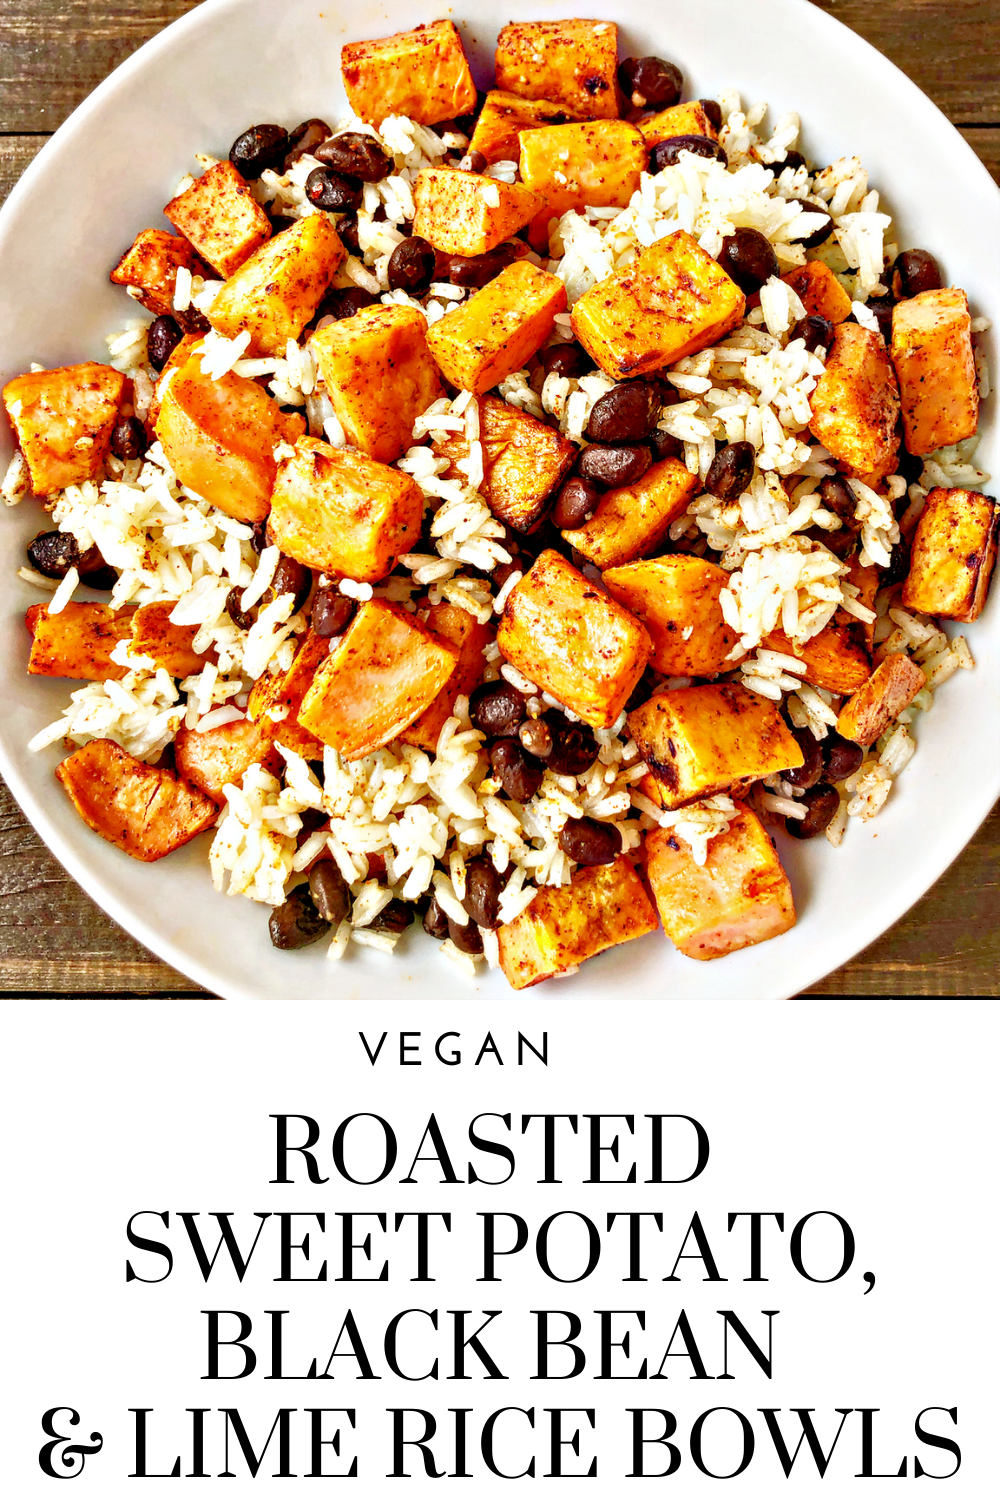 Roasted Sweet Potato, Black Bean & Lime Rice Bowls - A colorful, tasty, satisfying, protein-packed, budget friendly meal on the table in about 30-40 minutes. via @thiswifecooks